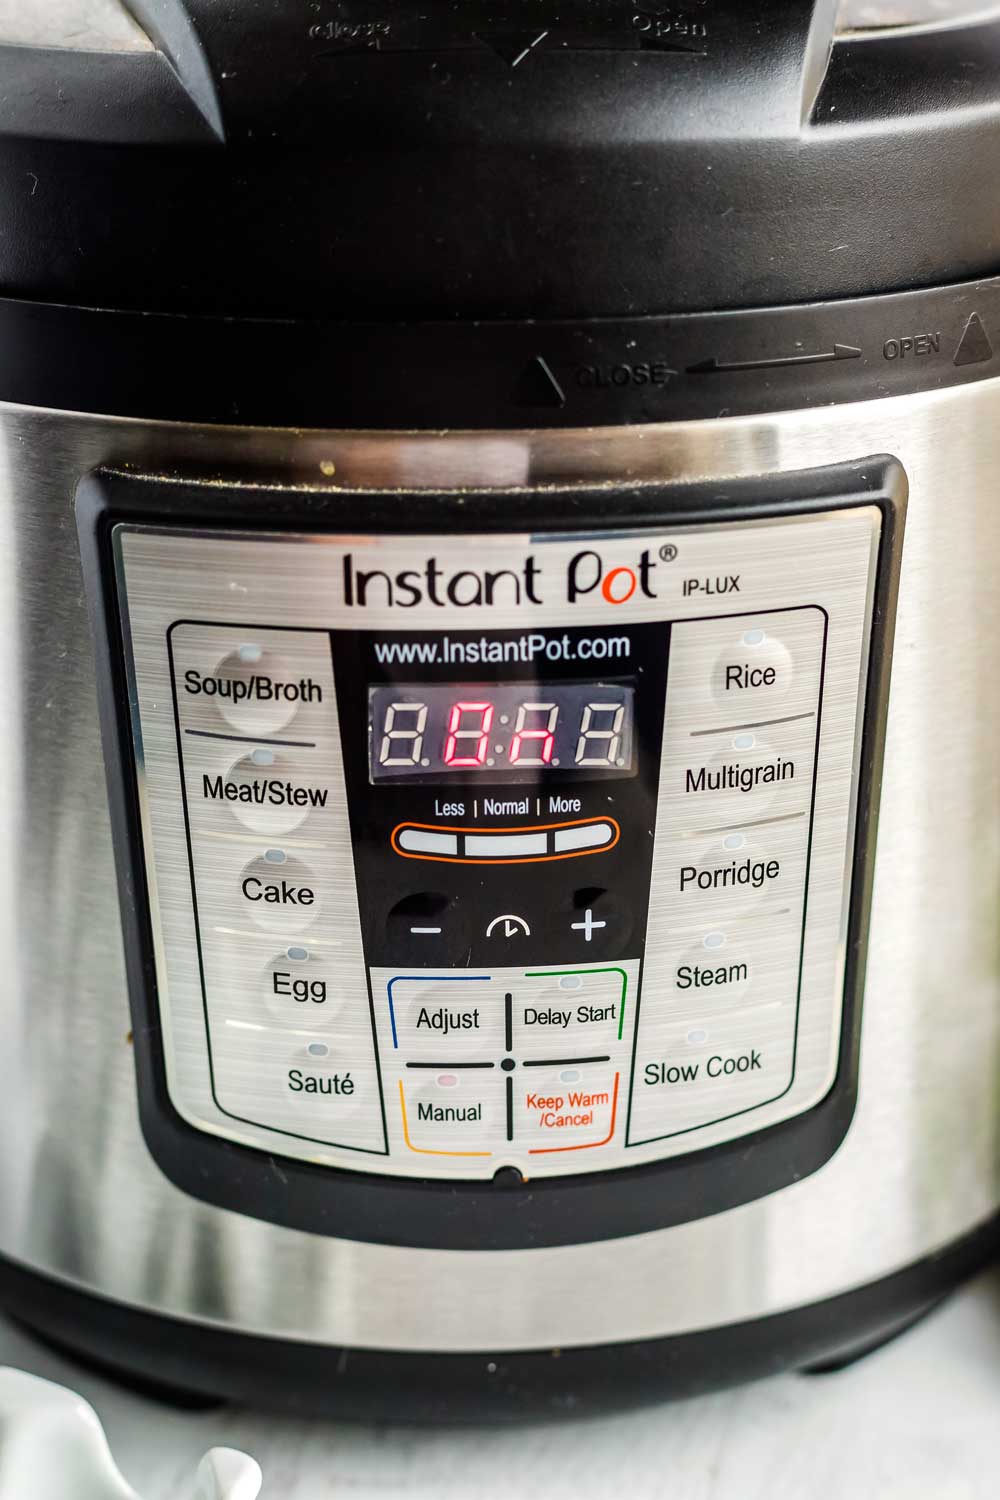 Process shot of how to set the Instant Pot to hard-boil eggs